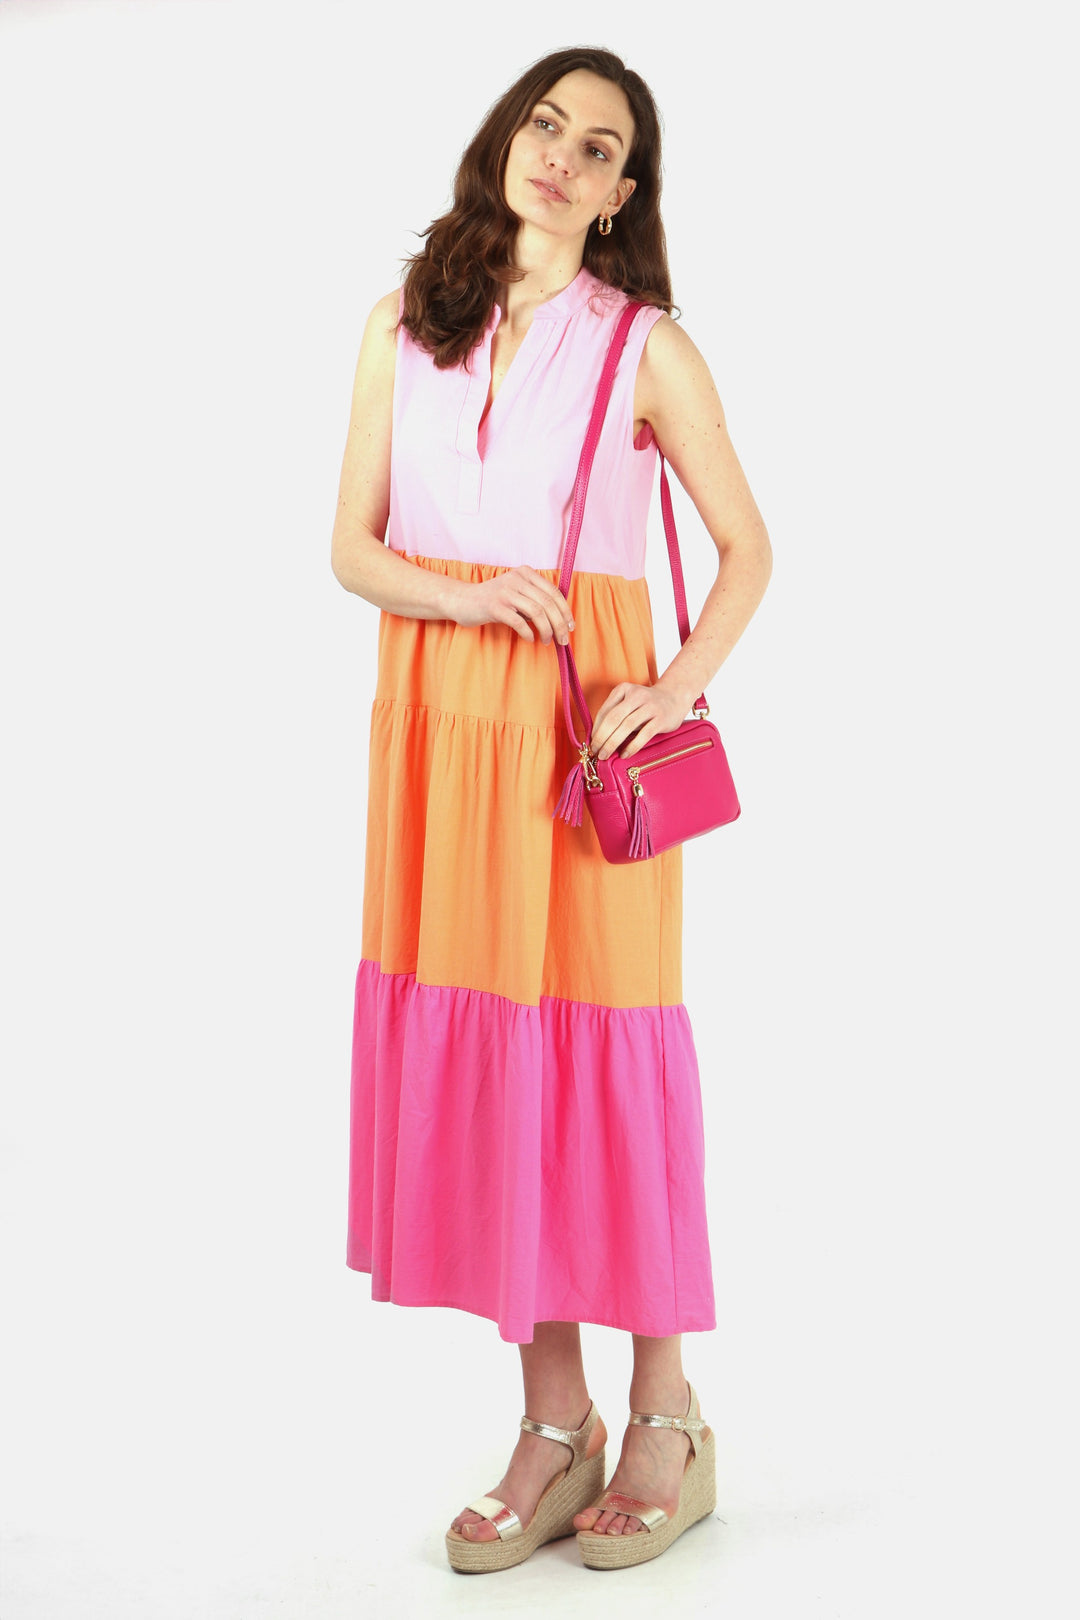 model wearing this pink striped dress with wedge sandals and a pink leather bag to accessorise